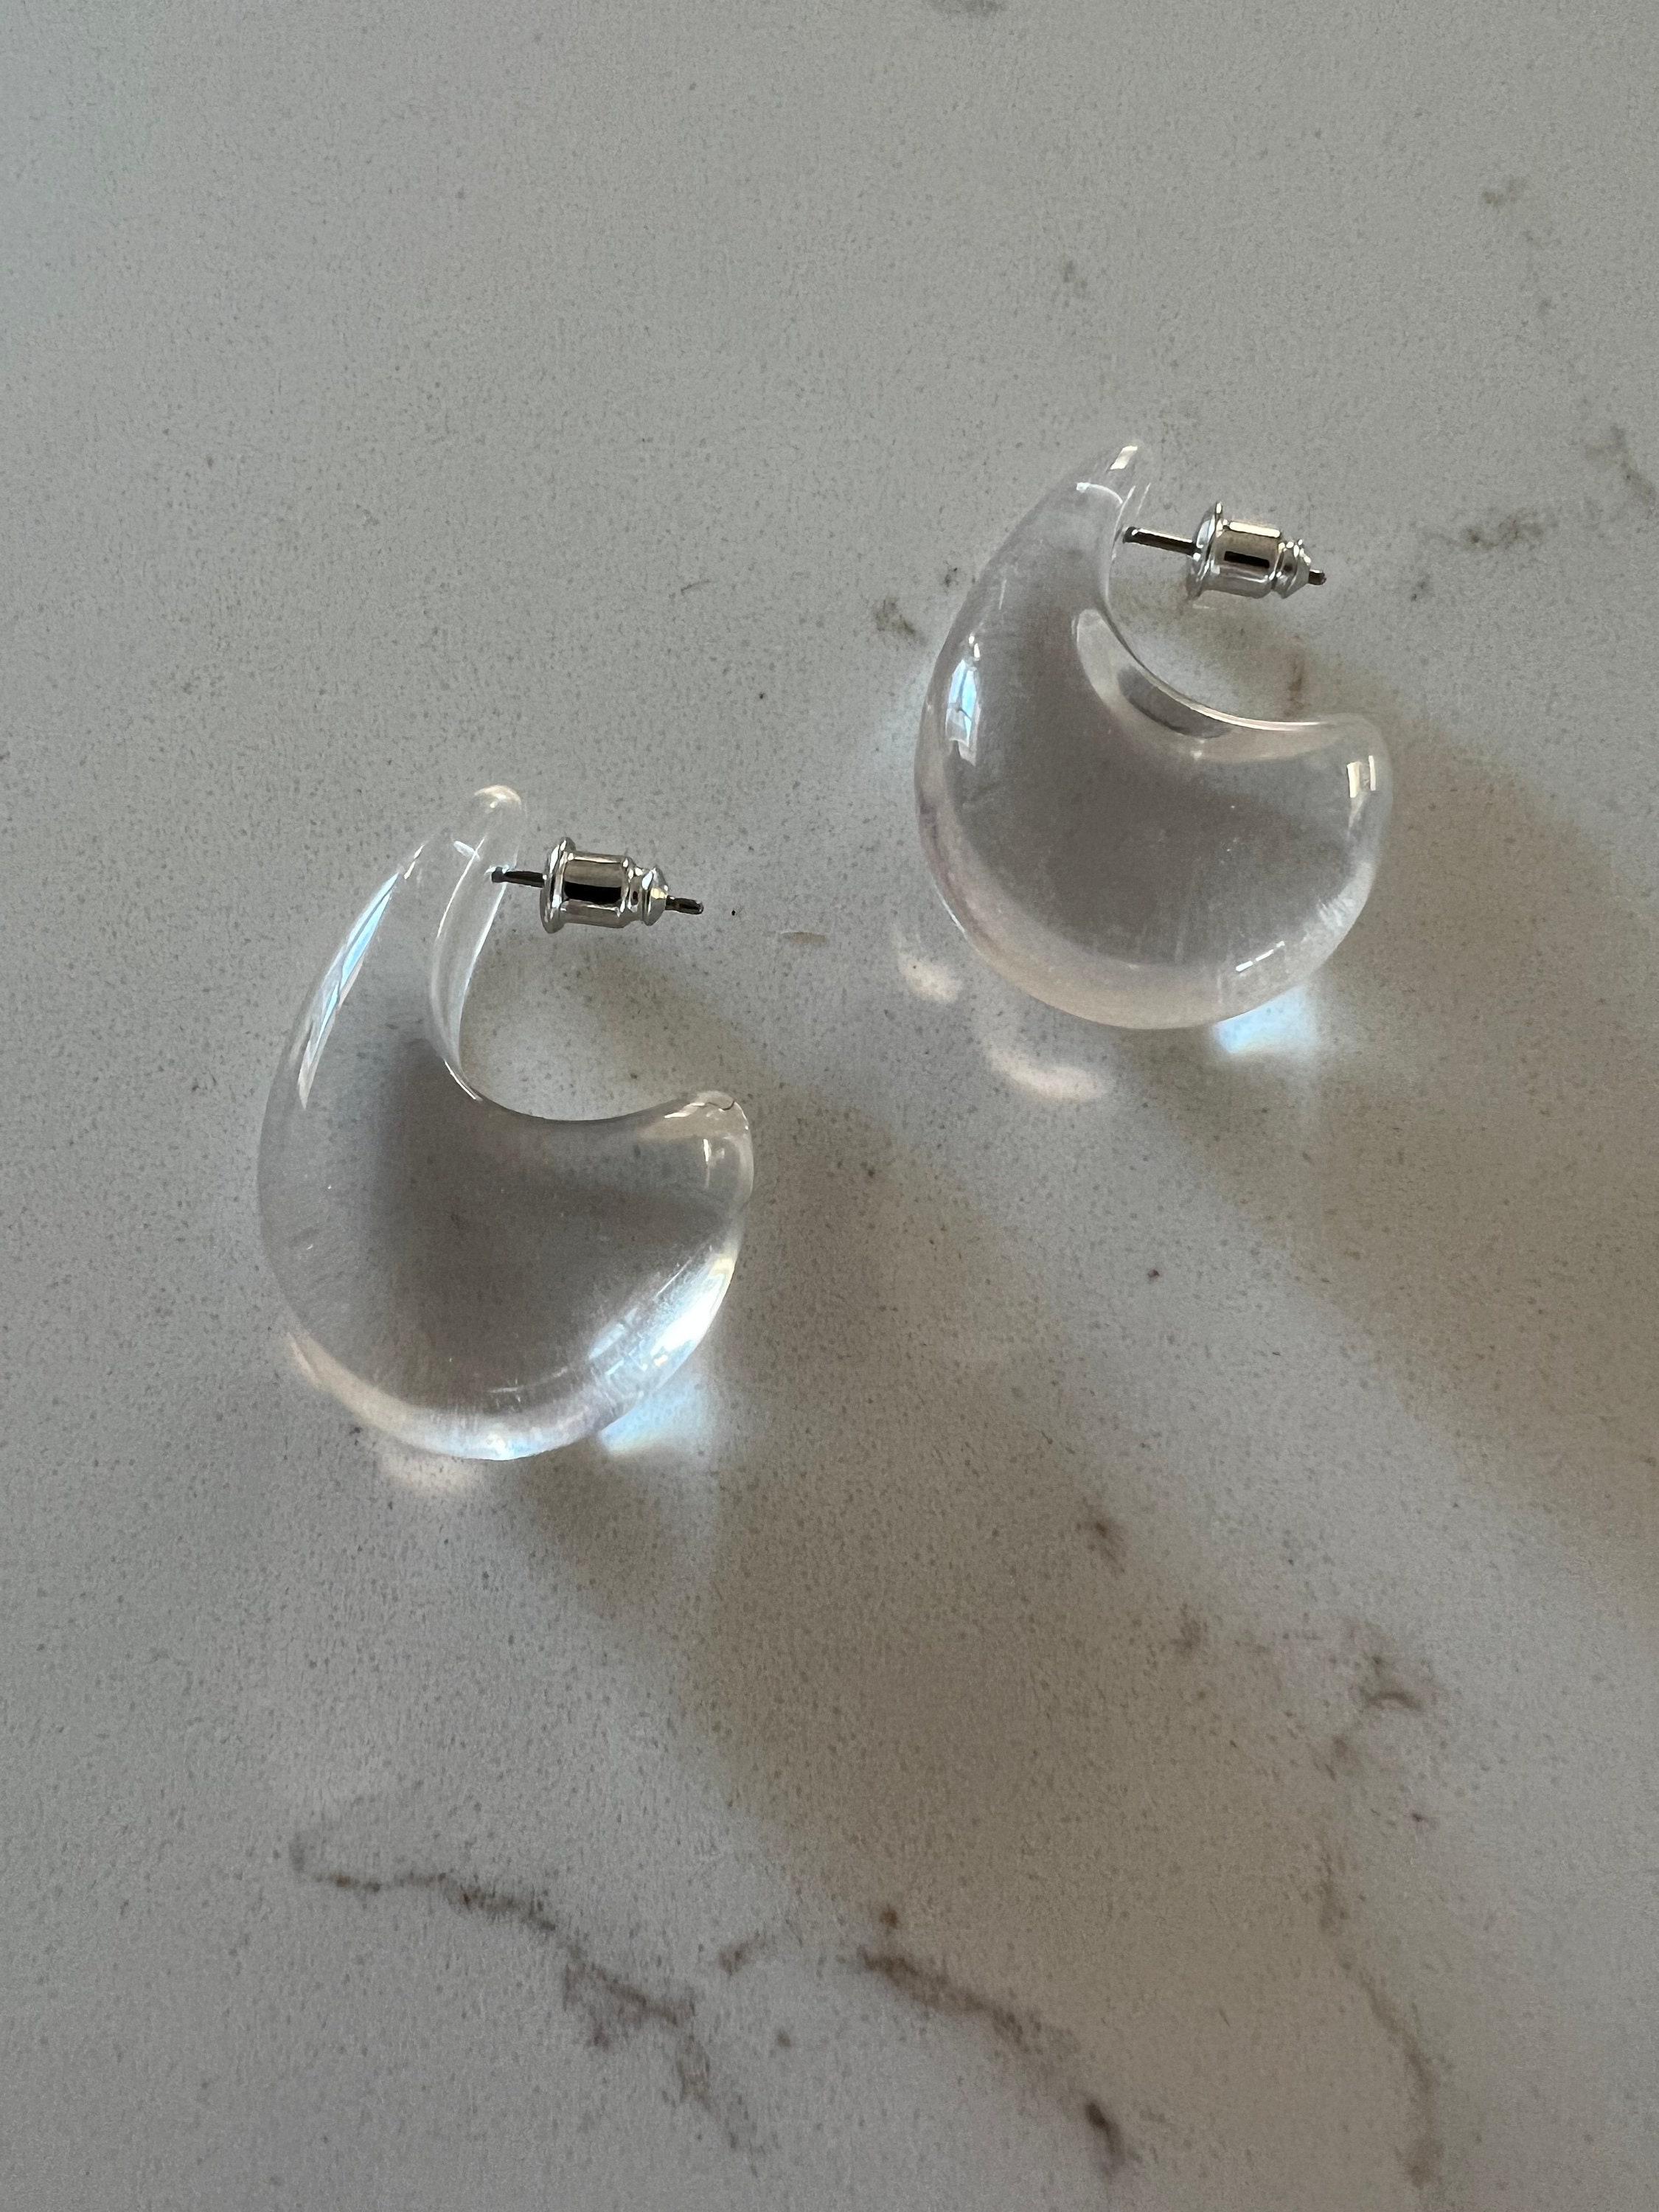 Clear Plastic Stud Earrings. Transparent in Colour Easily Hidden for Work  or School. Acrylic Post With Silicone Back. Small Clear Earring 